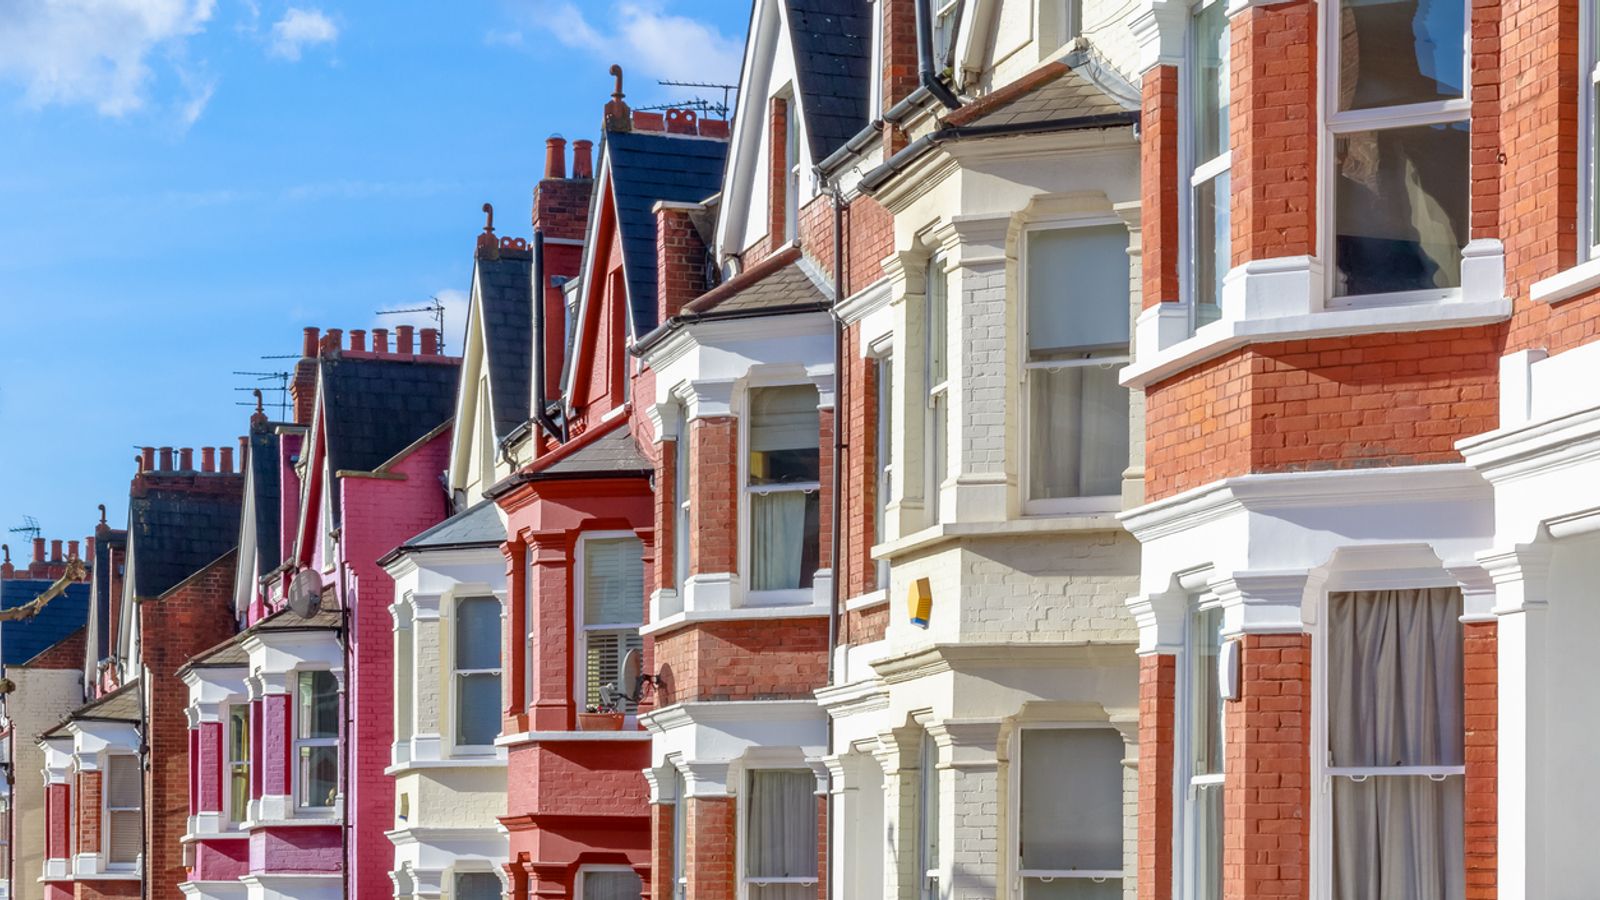 House prices back on the rise for first time in six months, Halifax says